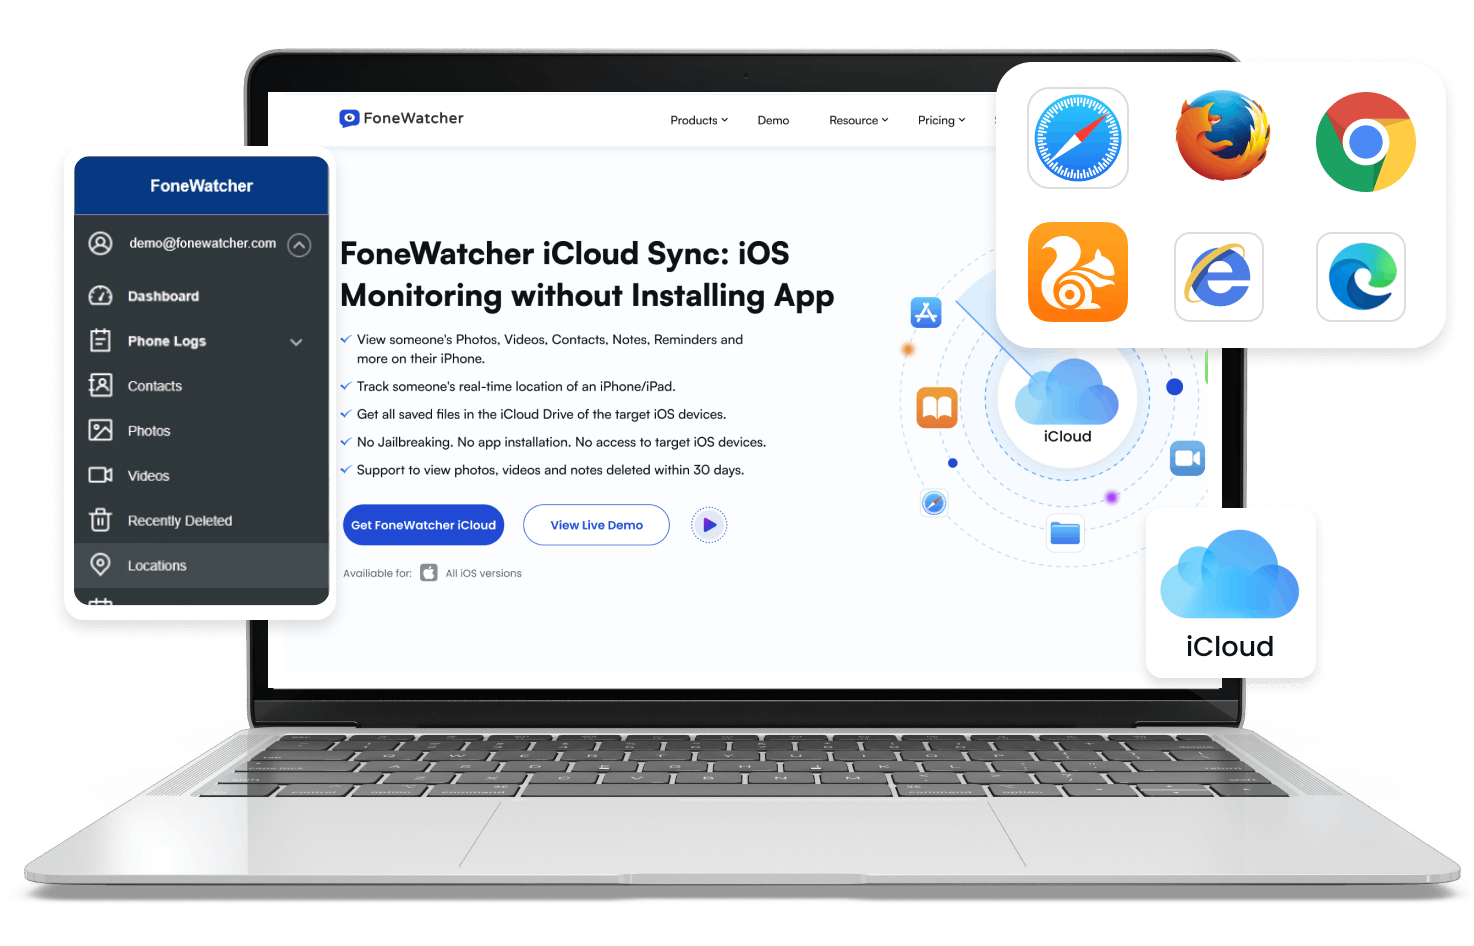 FoneWatcher iCloud Sync: iOS Monitoring without Installing App